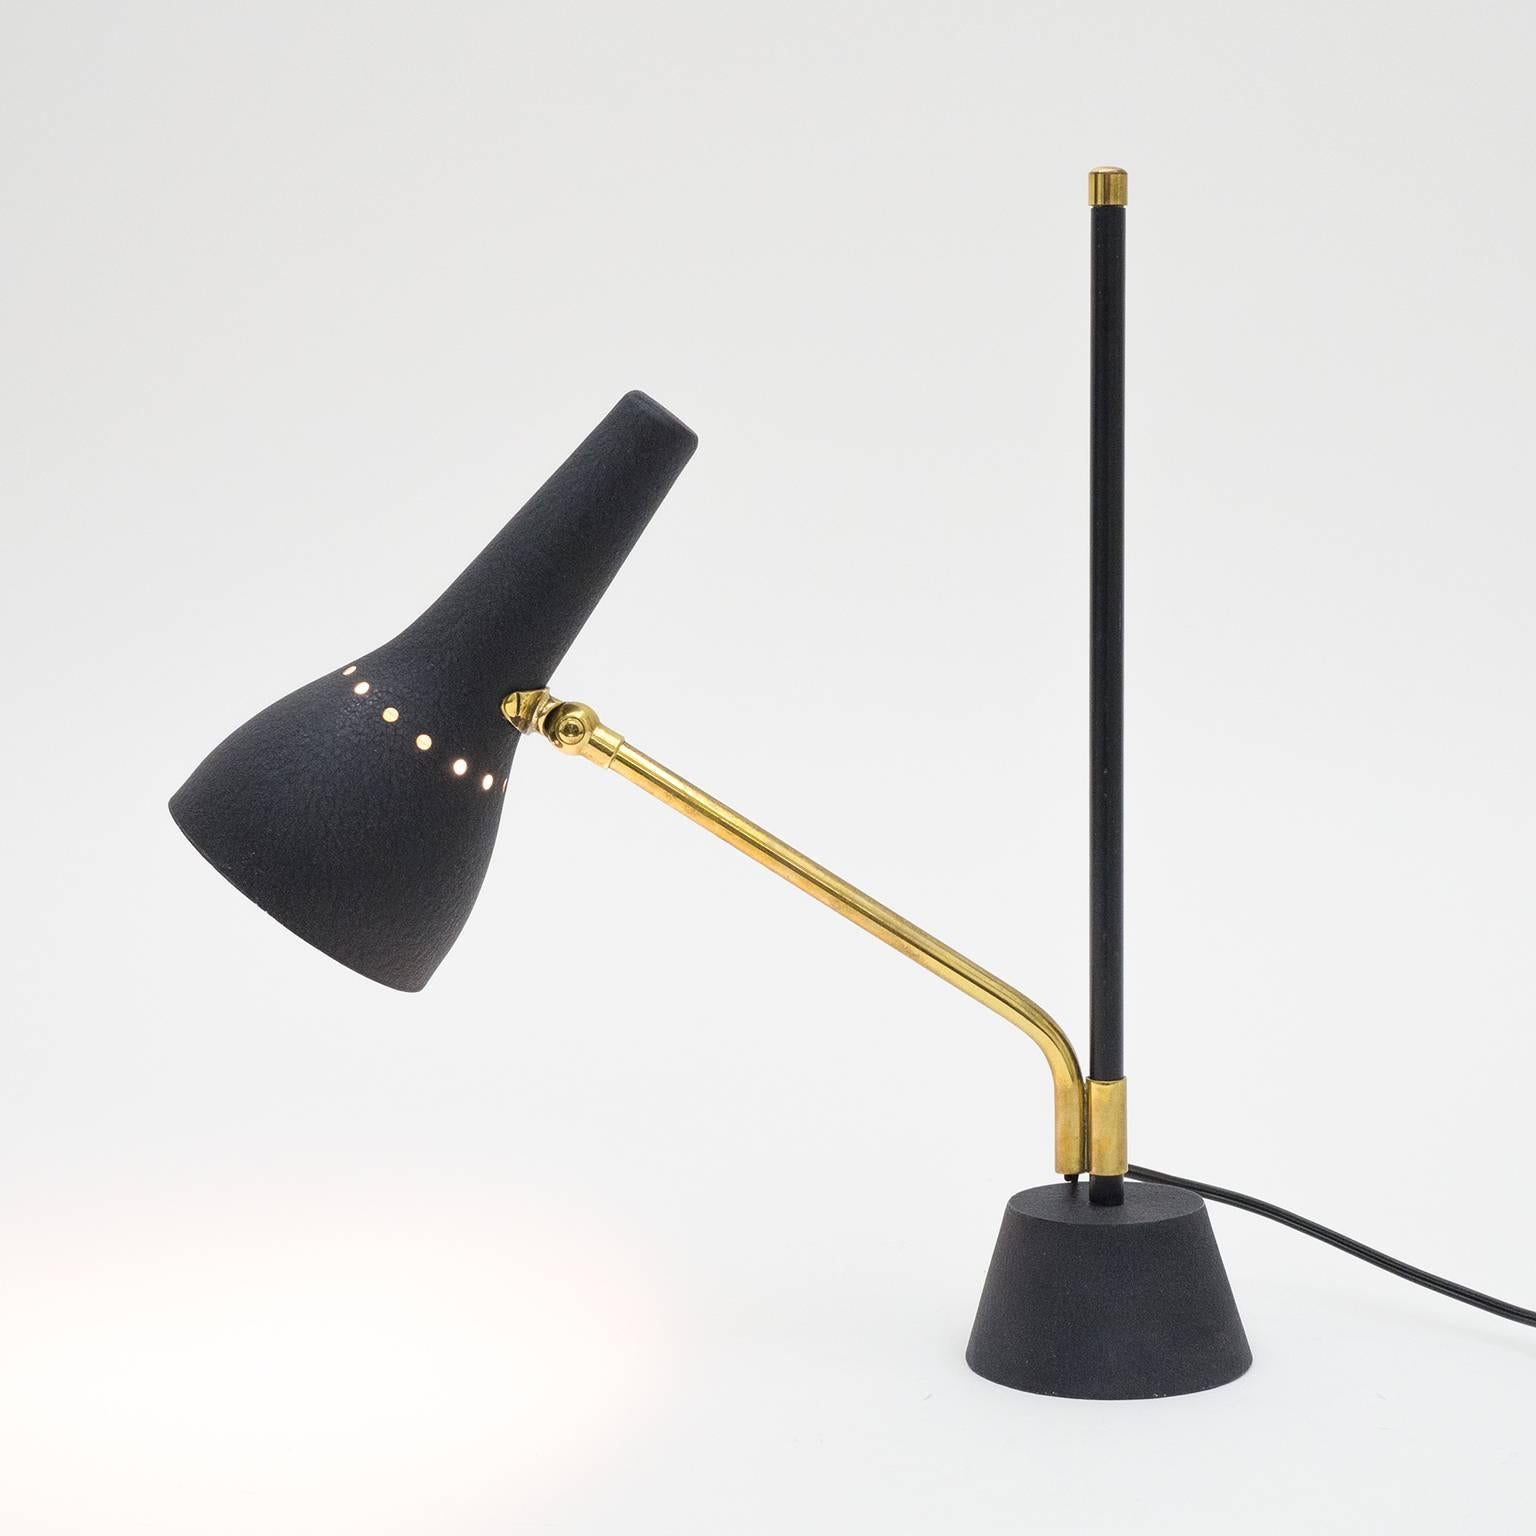 Remarkable modernist desk or task lamp, Germany, 1950s. The articulated brass arm slides up and down and swivels around the weighted Stand without the need of any mechanism. The cast base and perforated aluminum shade are lacquered in wrinkle paint.